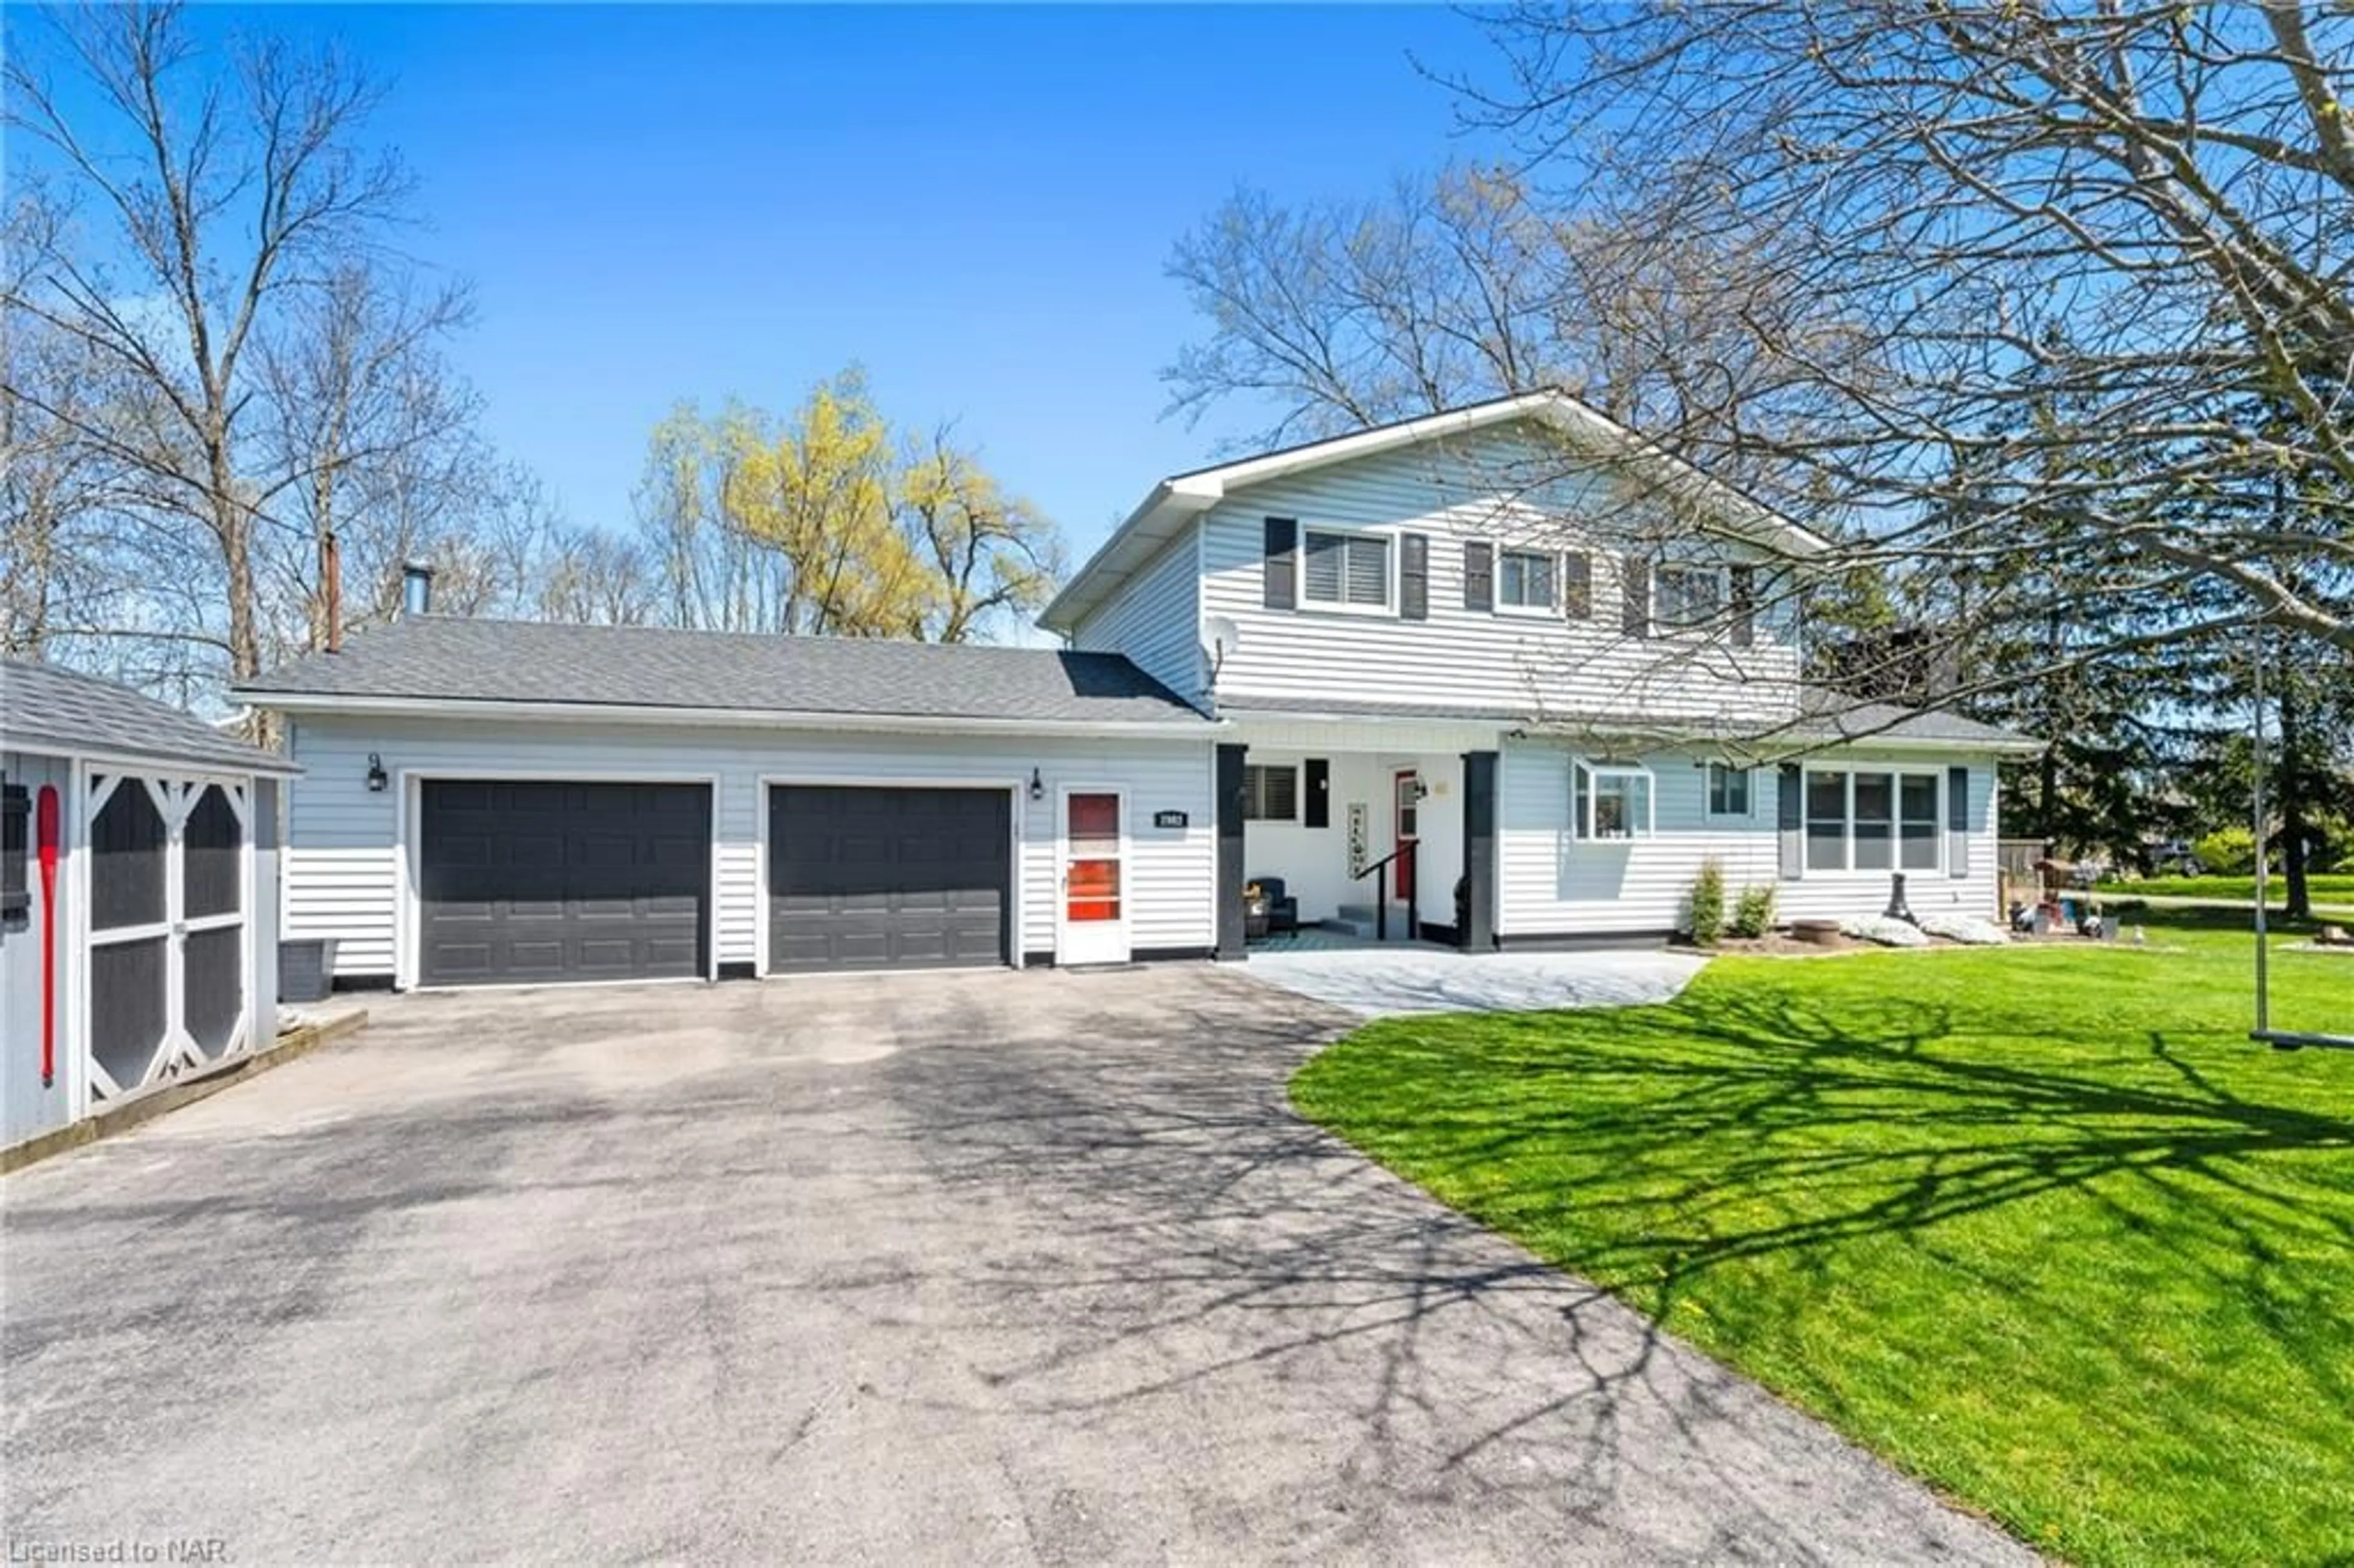 Frontside or backside of a home for 2982 Evadere Ave, Ridgeway Ontario L0S 1N0